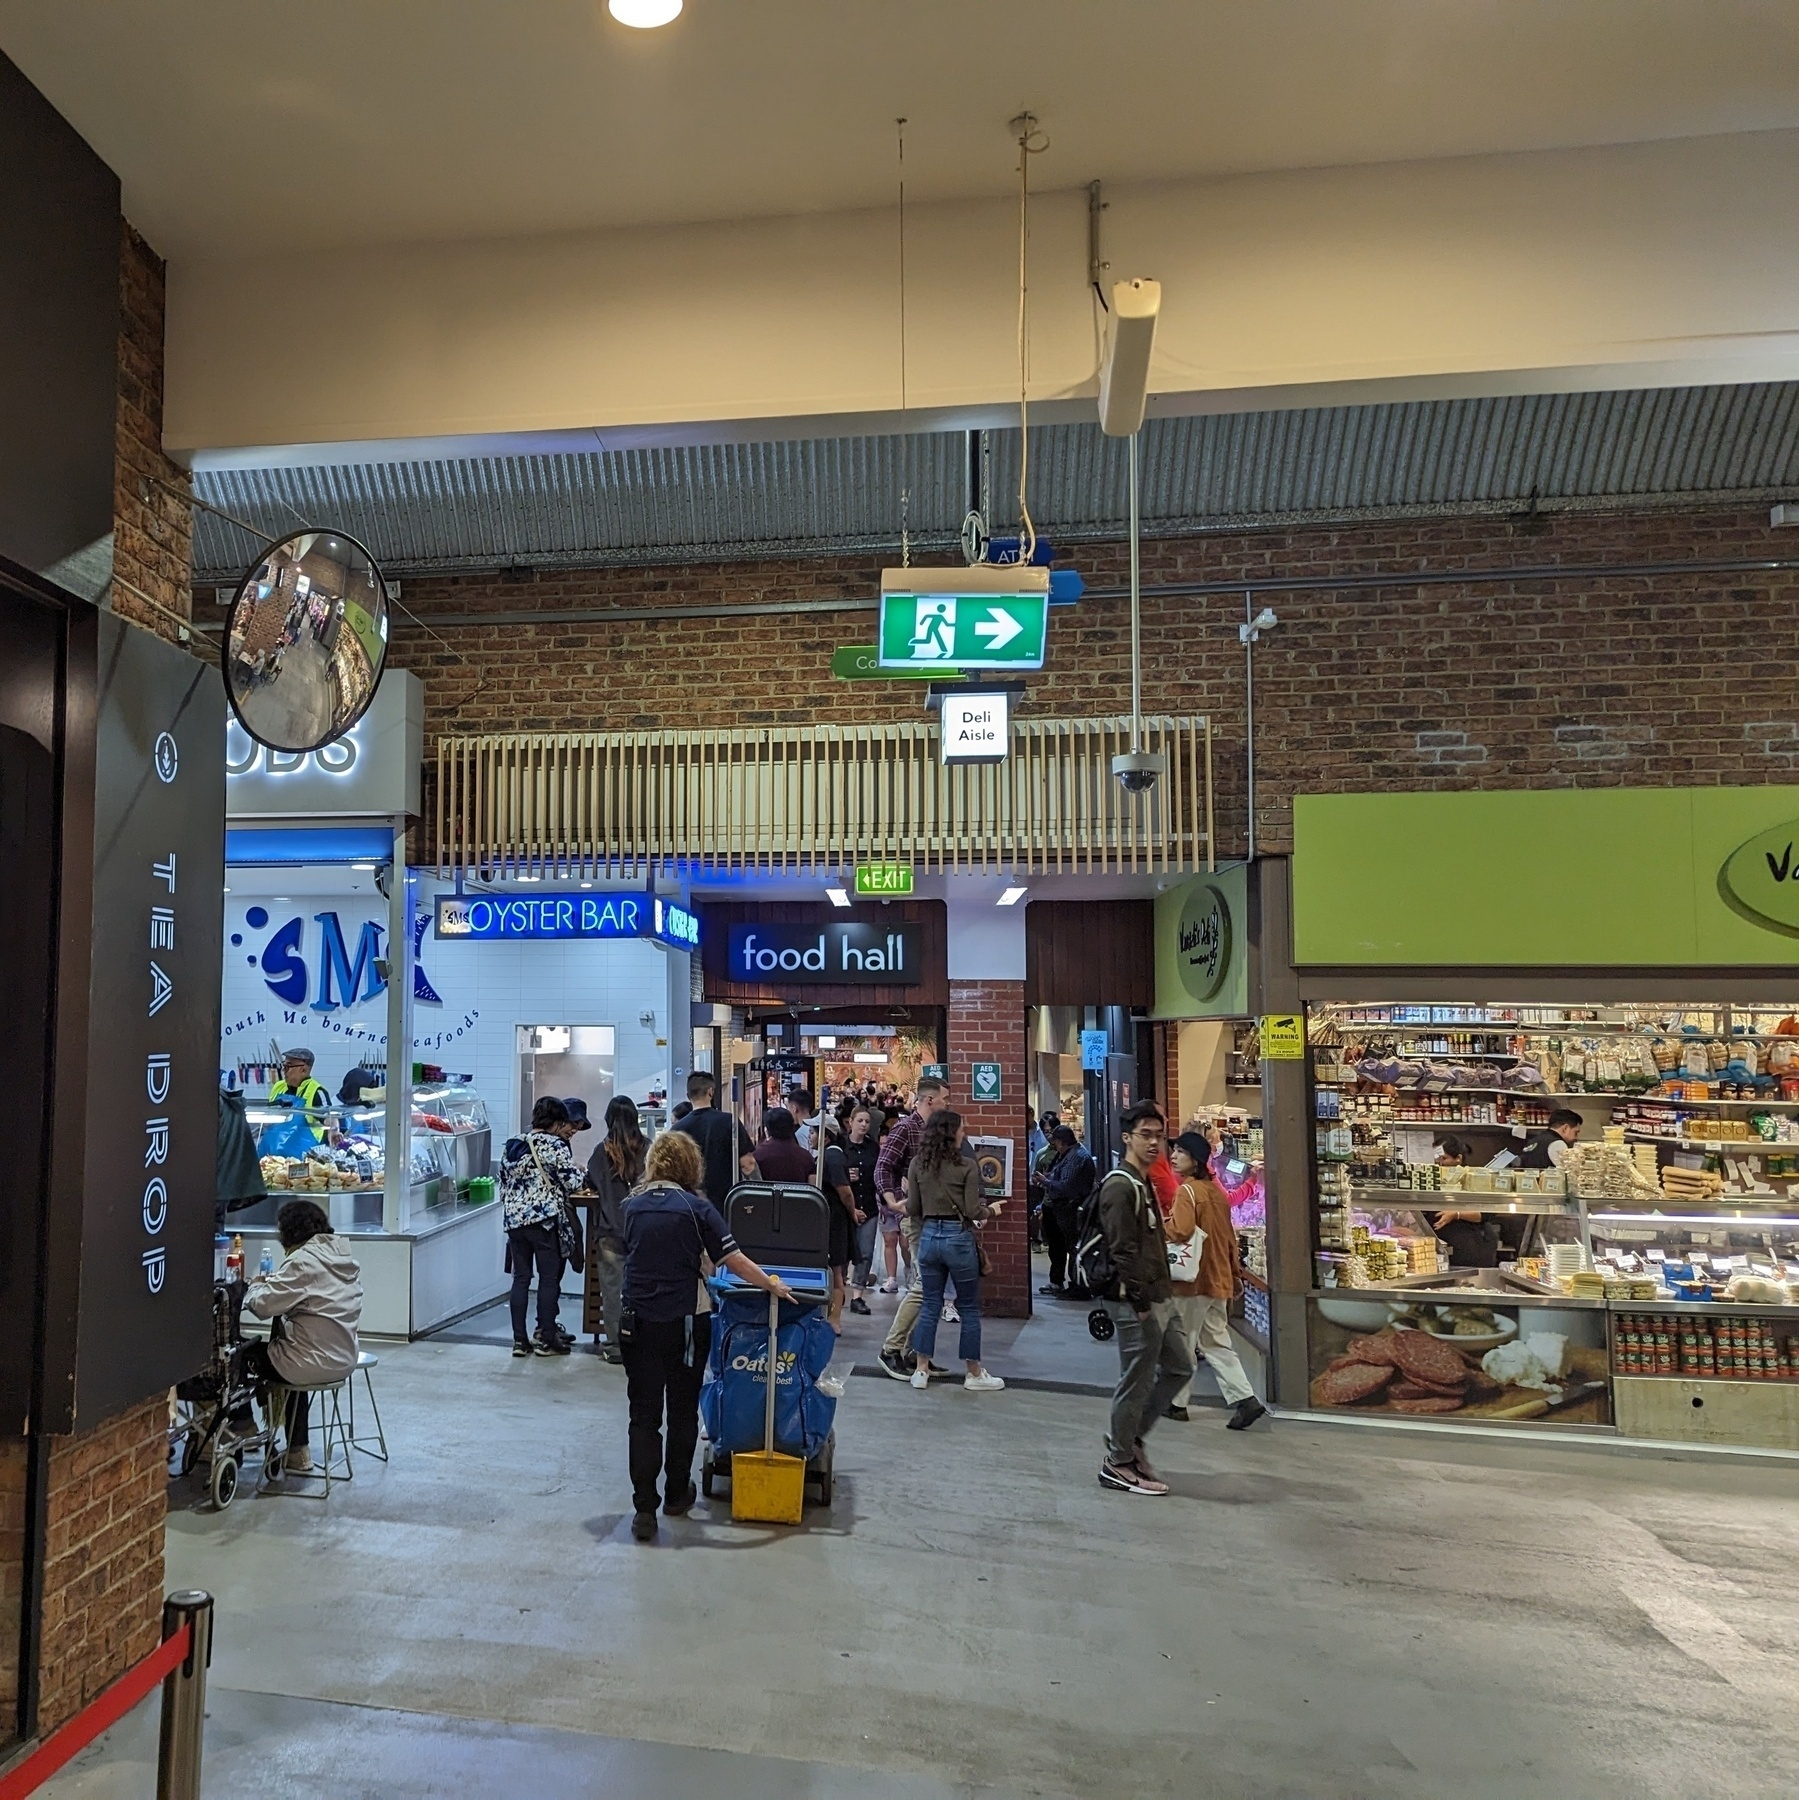 Entrance to the food hall, with a fish seller on the left.